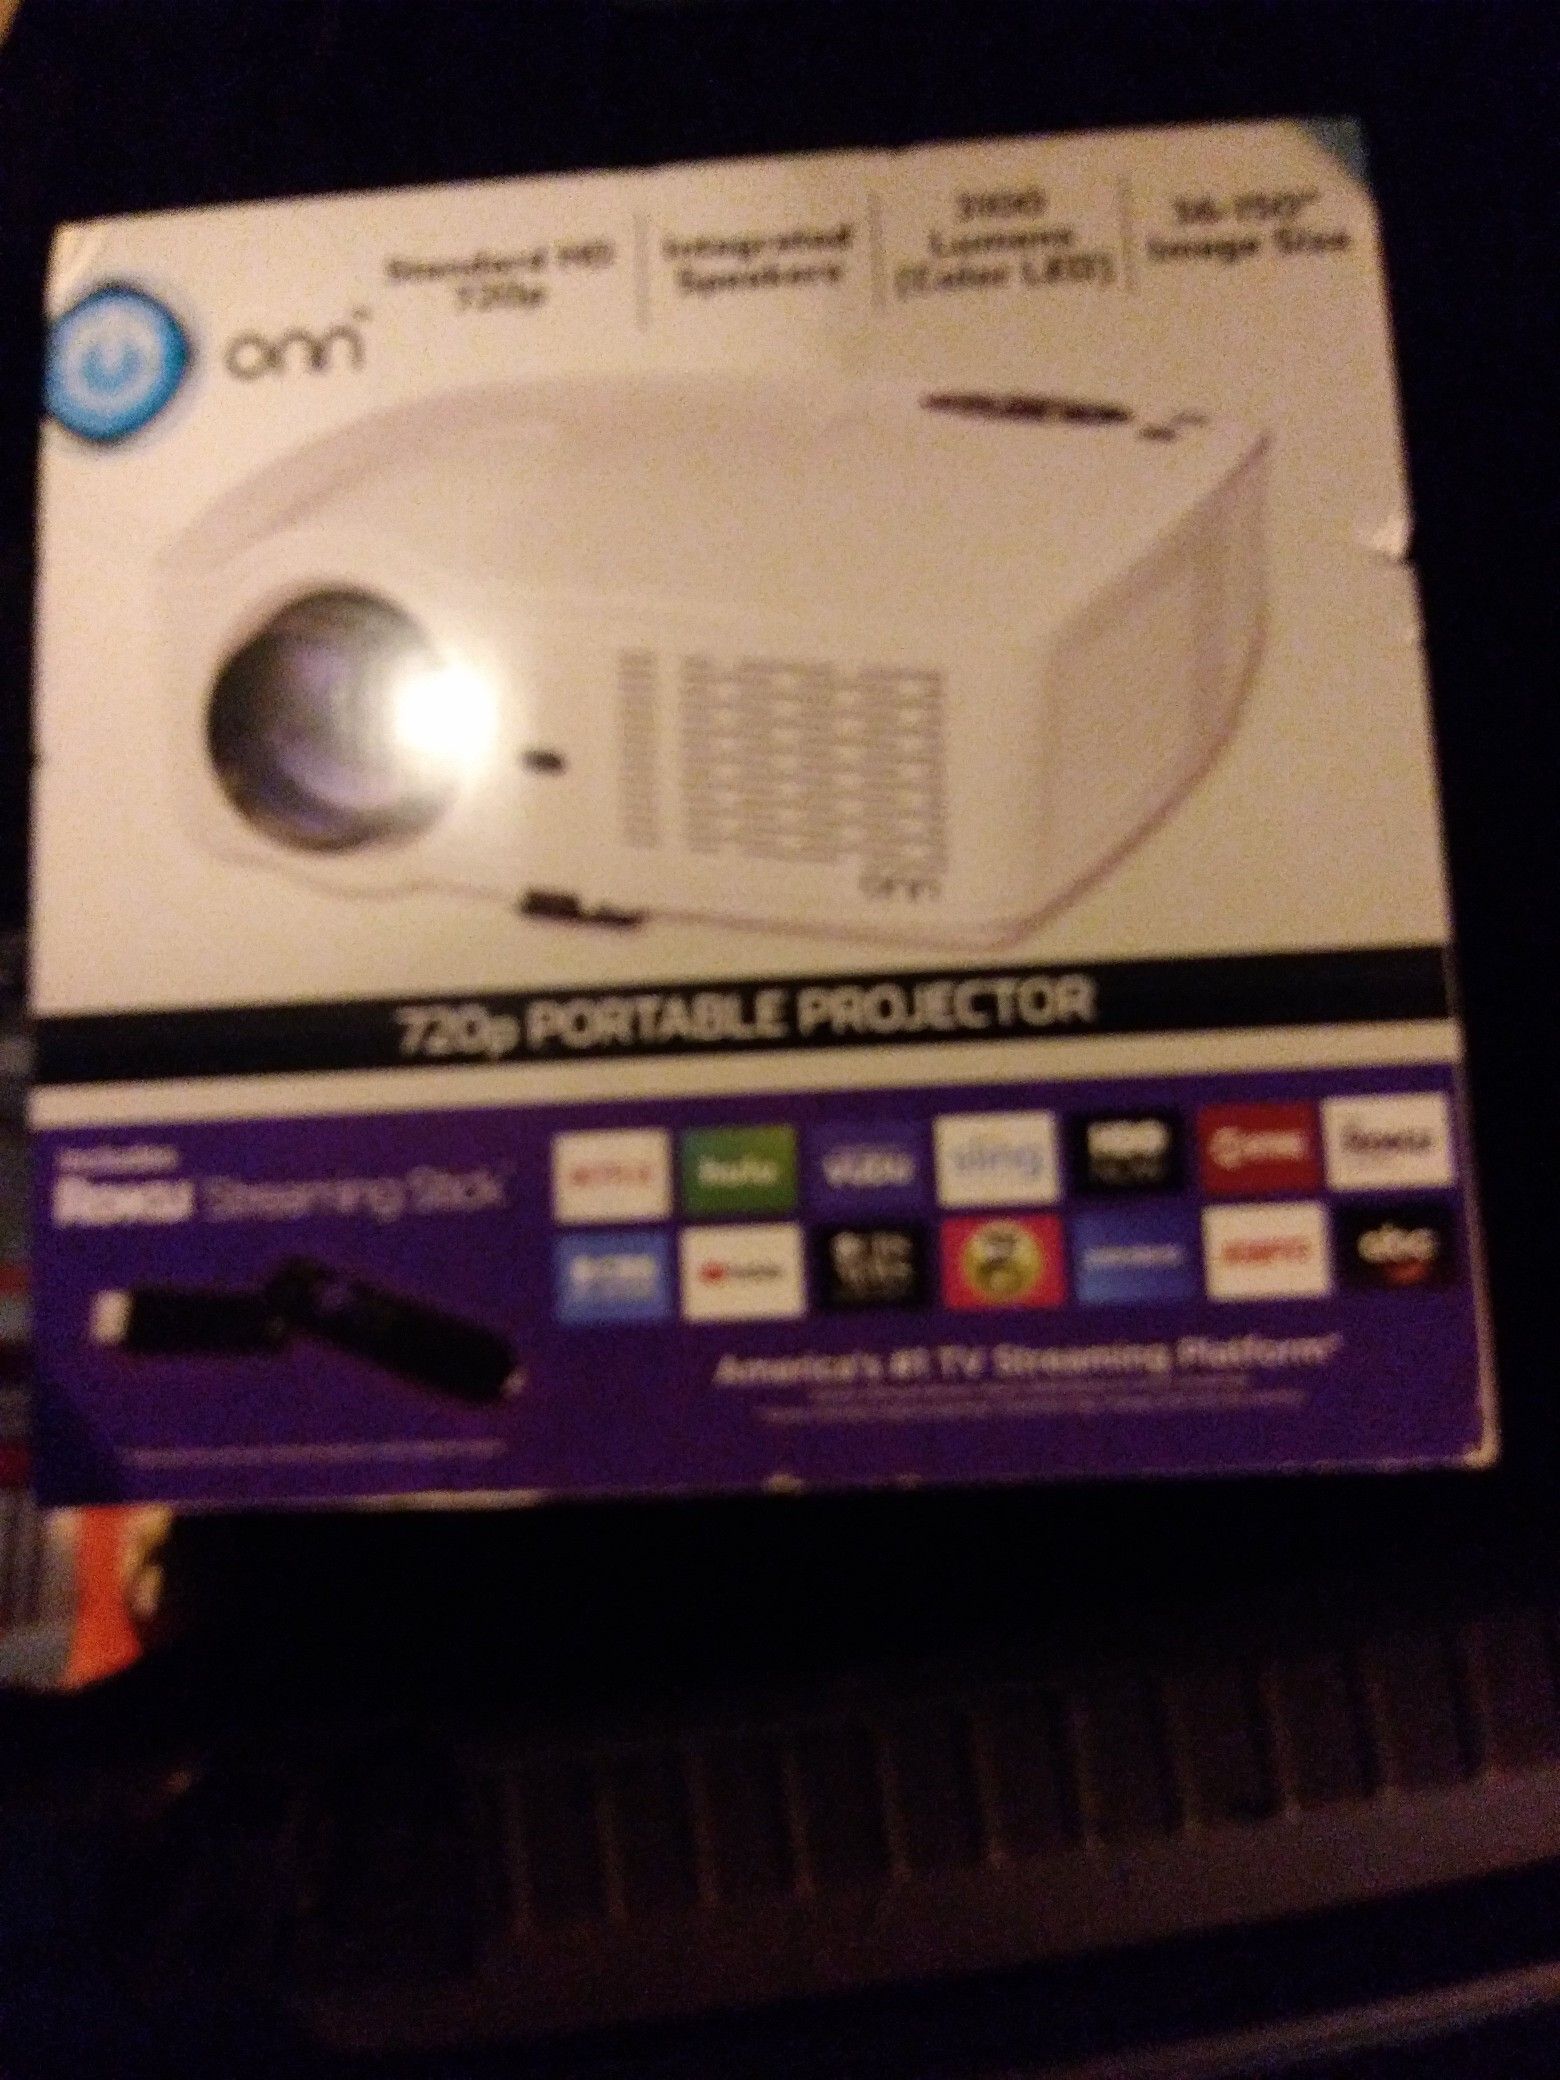 Brand new Projector 720p hd include a Roku Streaming Stick